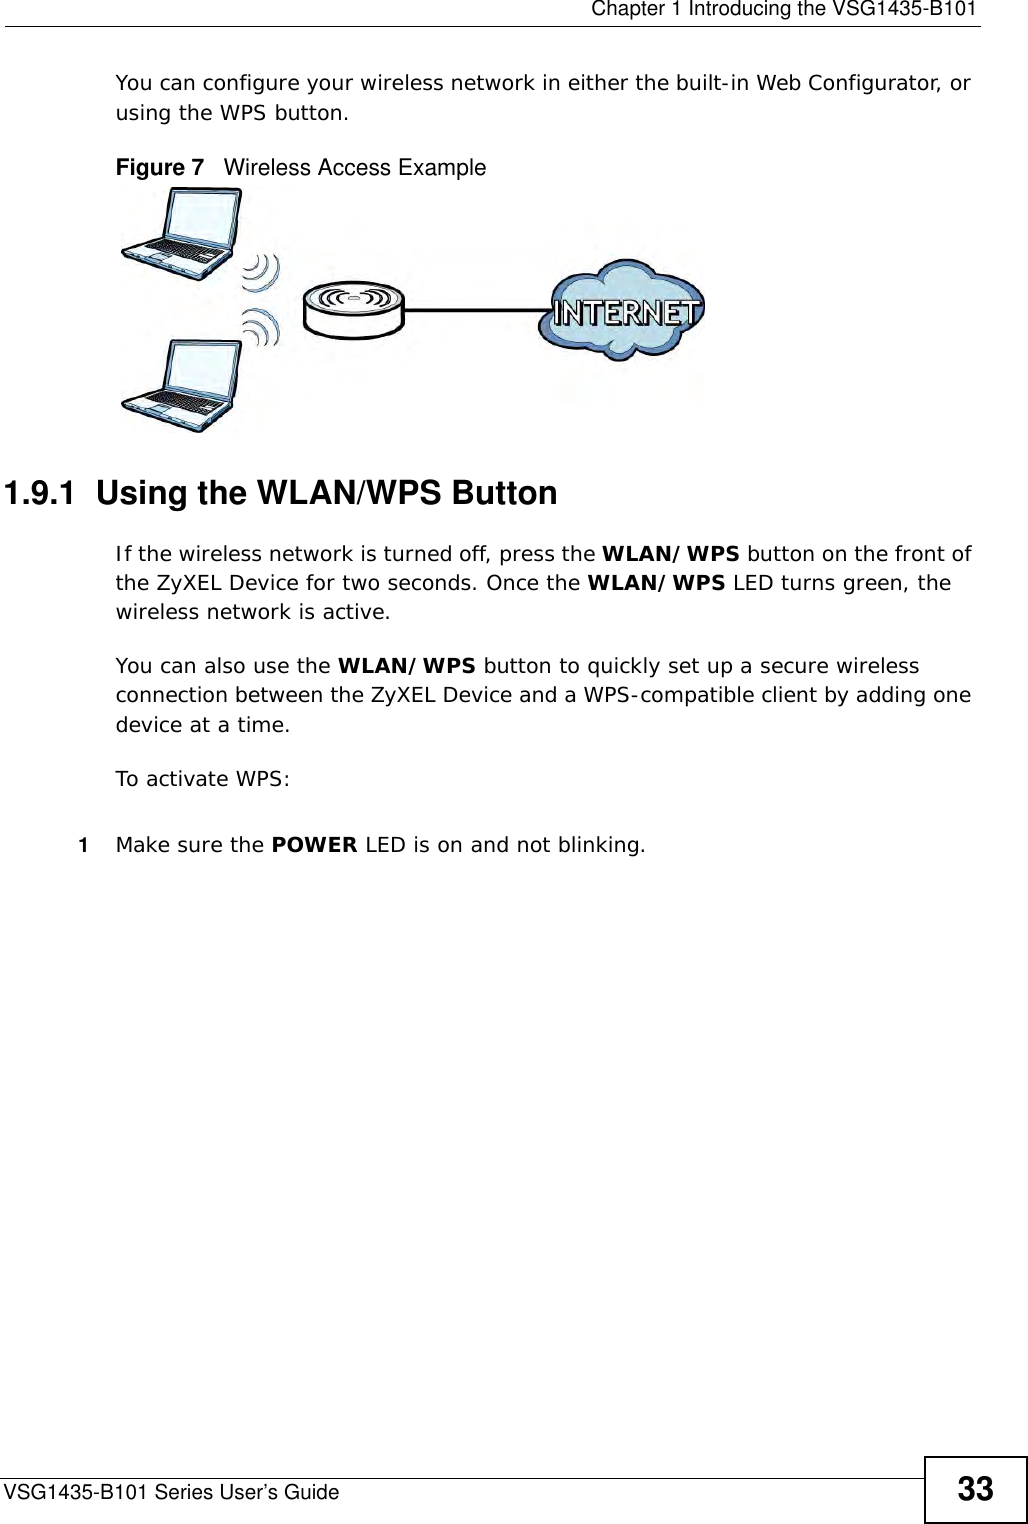  Chapter 1 Introducing the VSG1435-B101VSG1435-B101 Series User’s Guide 33You can configure your wireless network in either the built-in Web Configurator, or using the WPS button.Figure 7   Wireless Access Example1.9.1  Using the WLAN/WPS ButtonIf the wireless network is turned off, press the WLAN/WPS button on the front of the ZyXEL Device for two seconds. Once the WLAN/WPS LED turns green, the wireless network is active.You can also use the WLAN/WPS button to quickly set up a secure wireless connection between the ZyXEL Device and a WPS-compatible client by adding one device at a time.To activate WPS:1Make sure the POWER LED is on and not blinking.